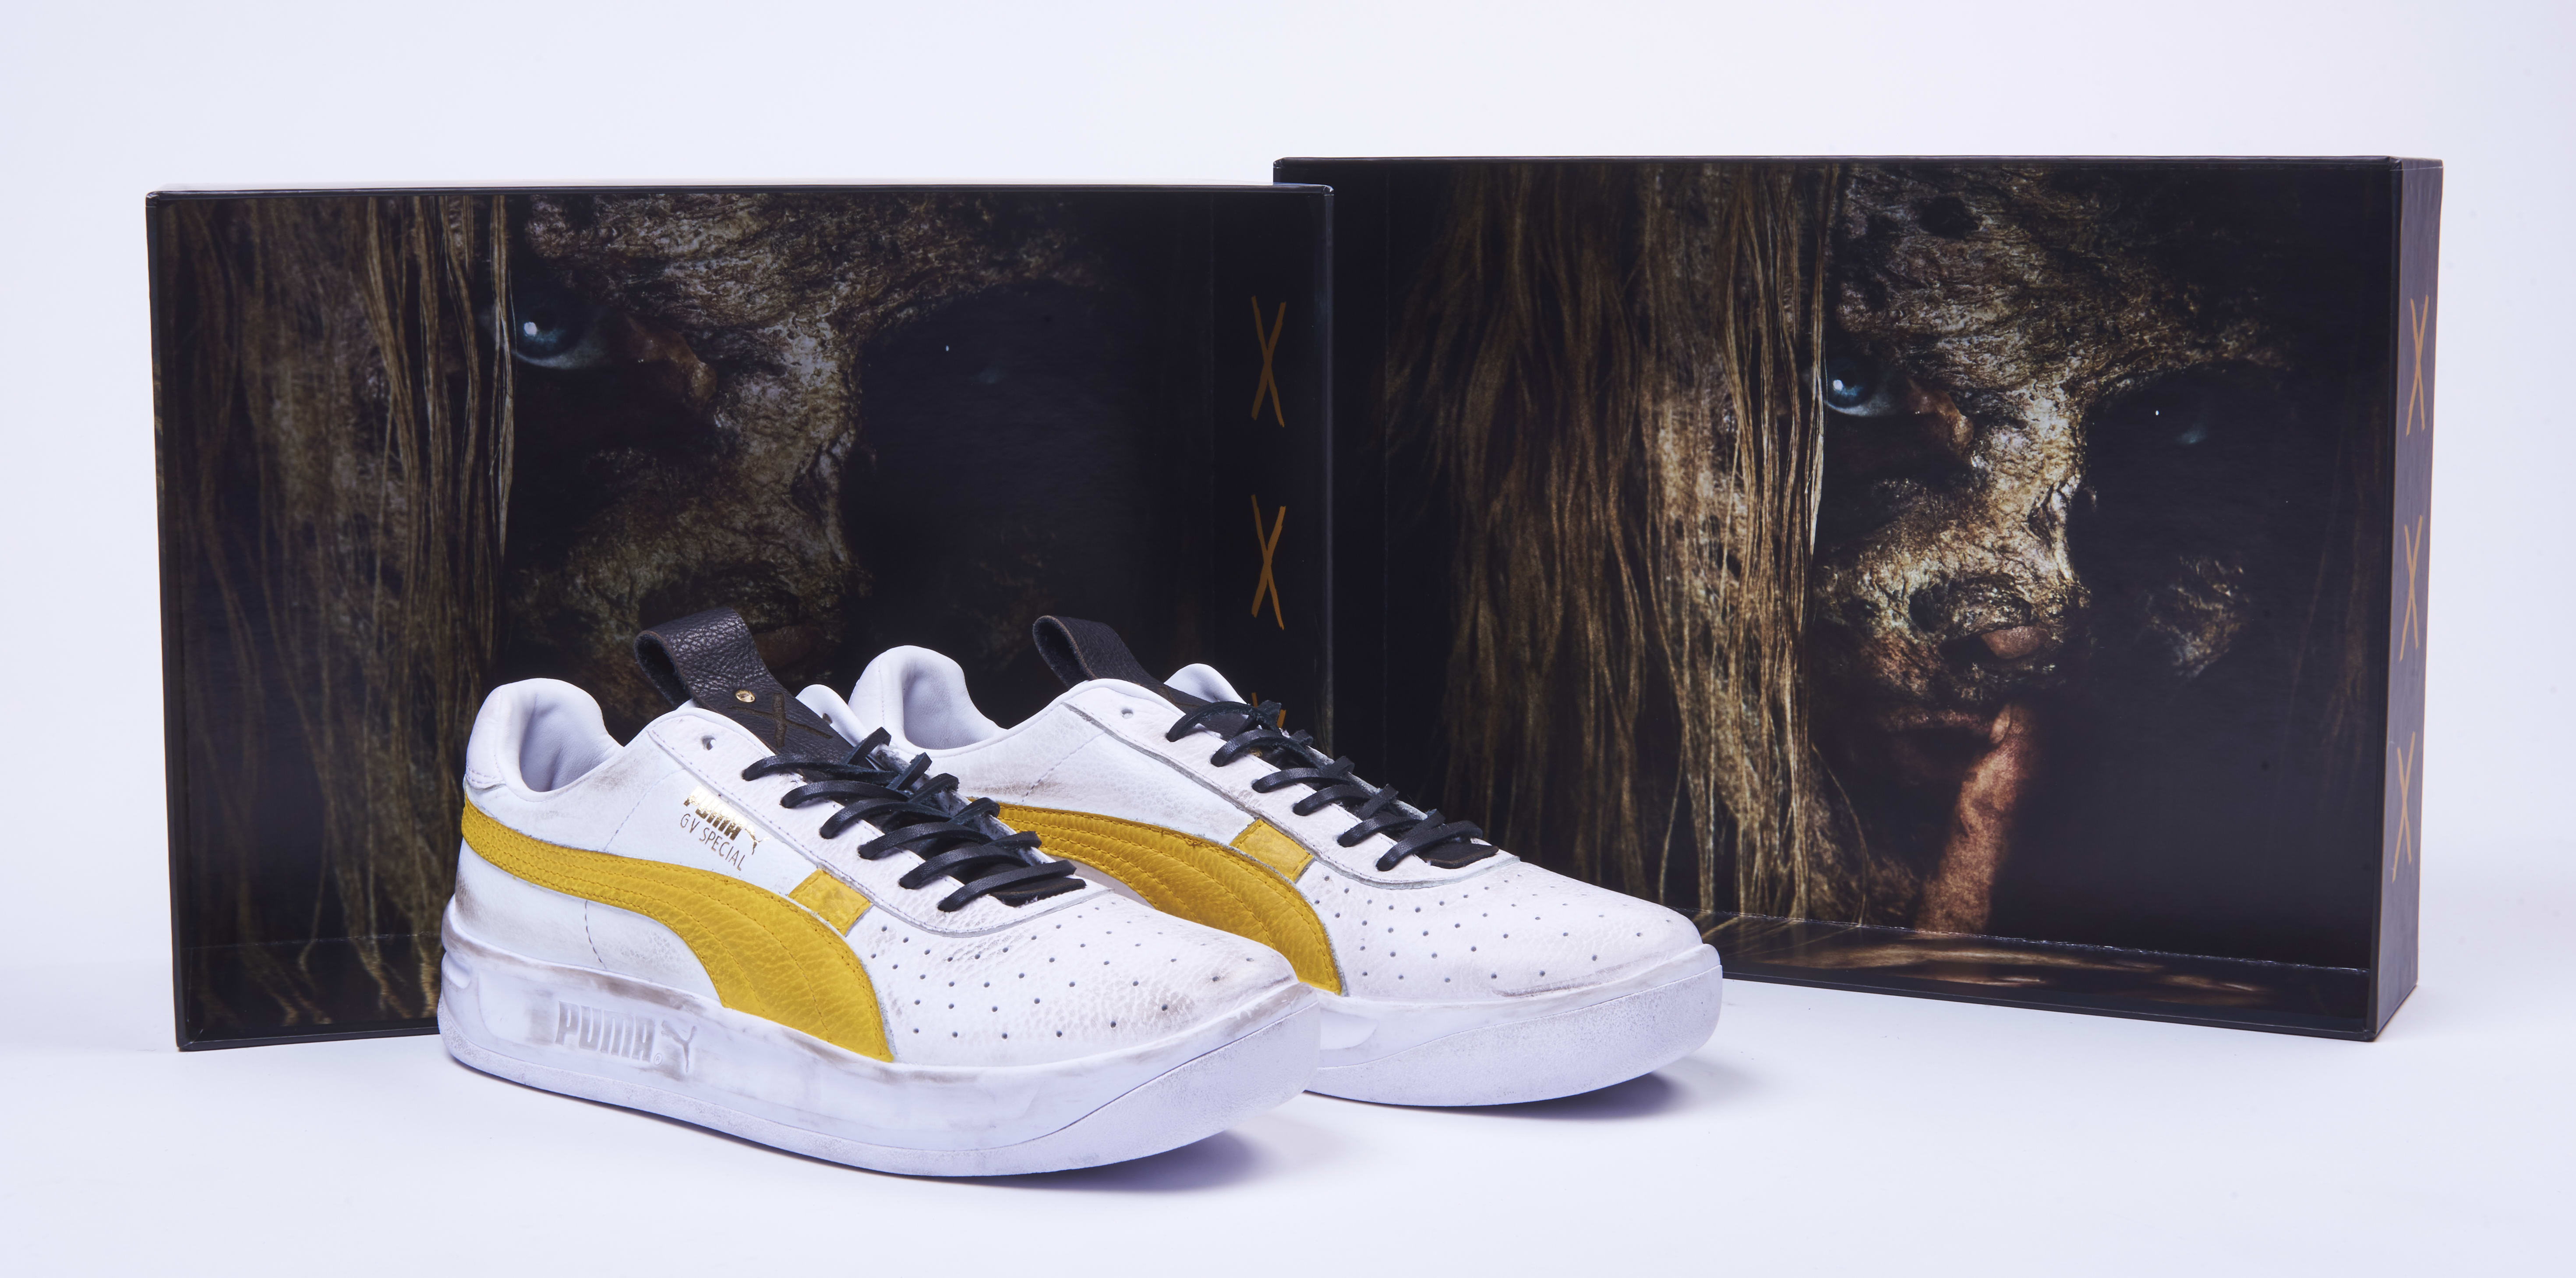 puma shoes for walking